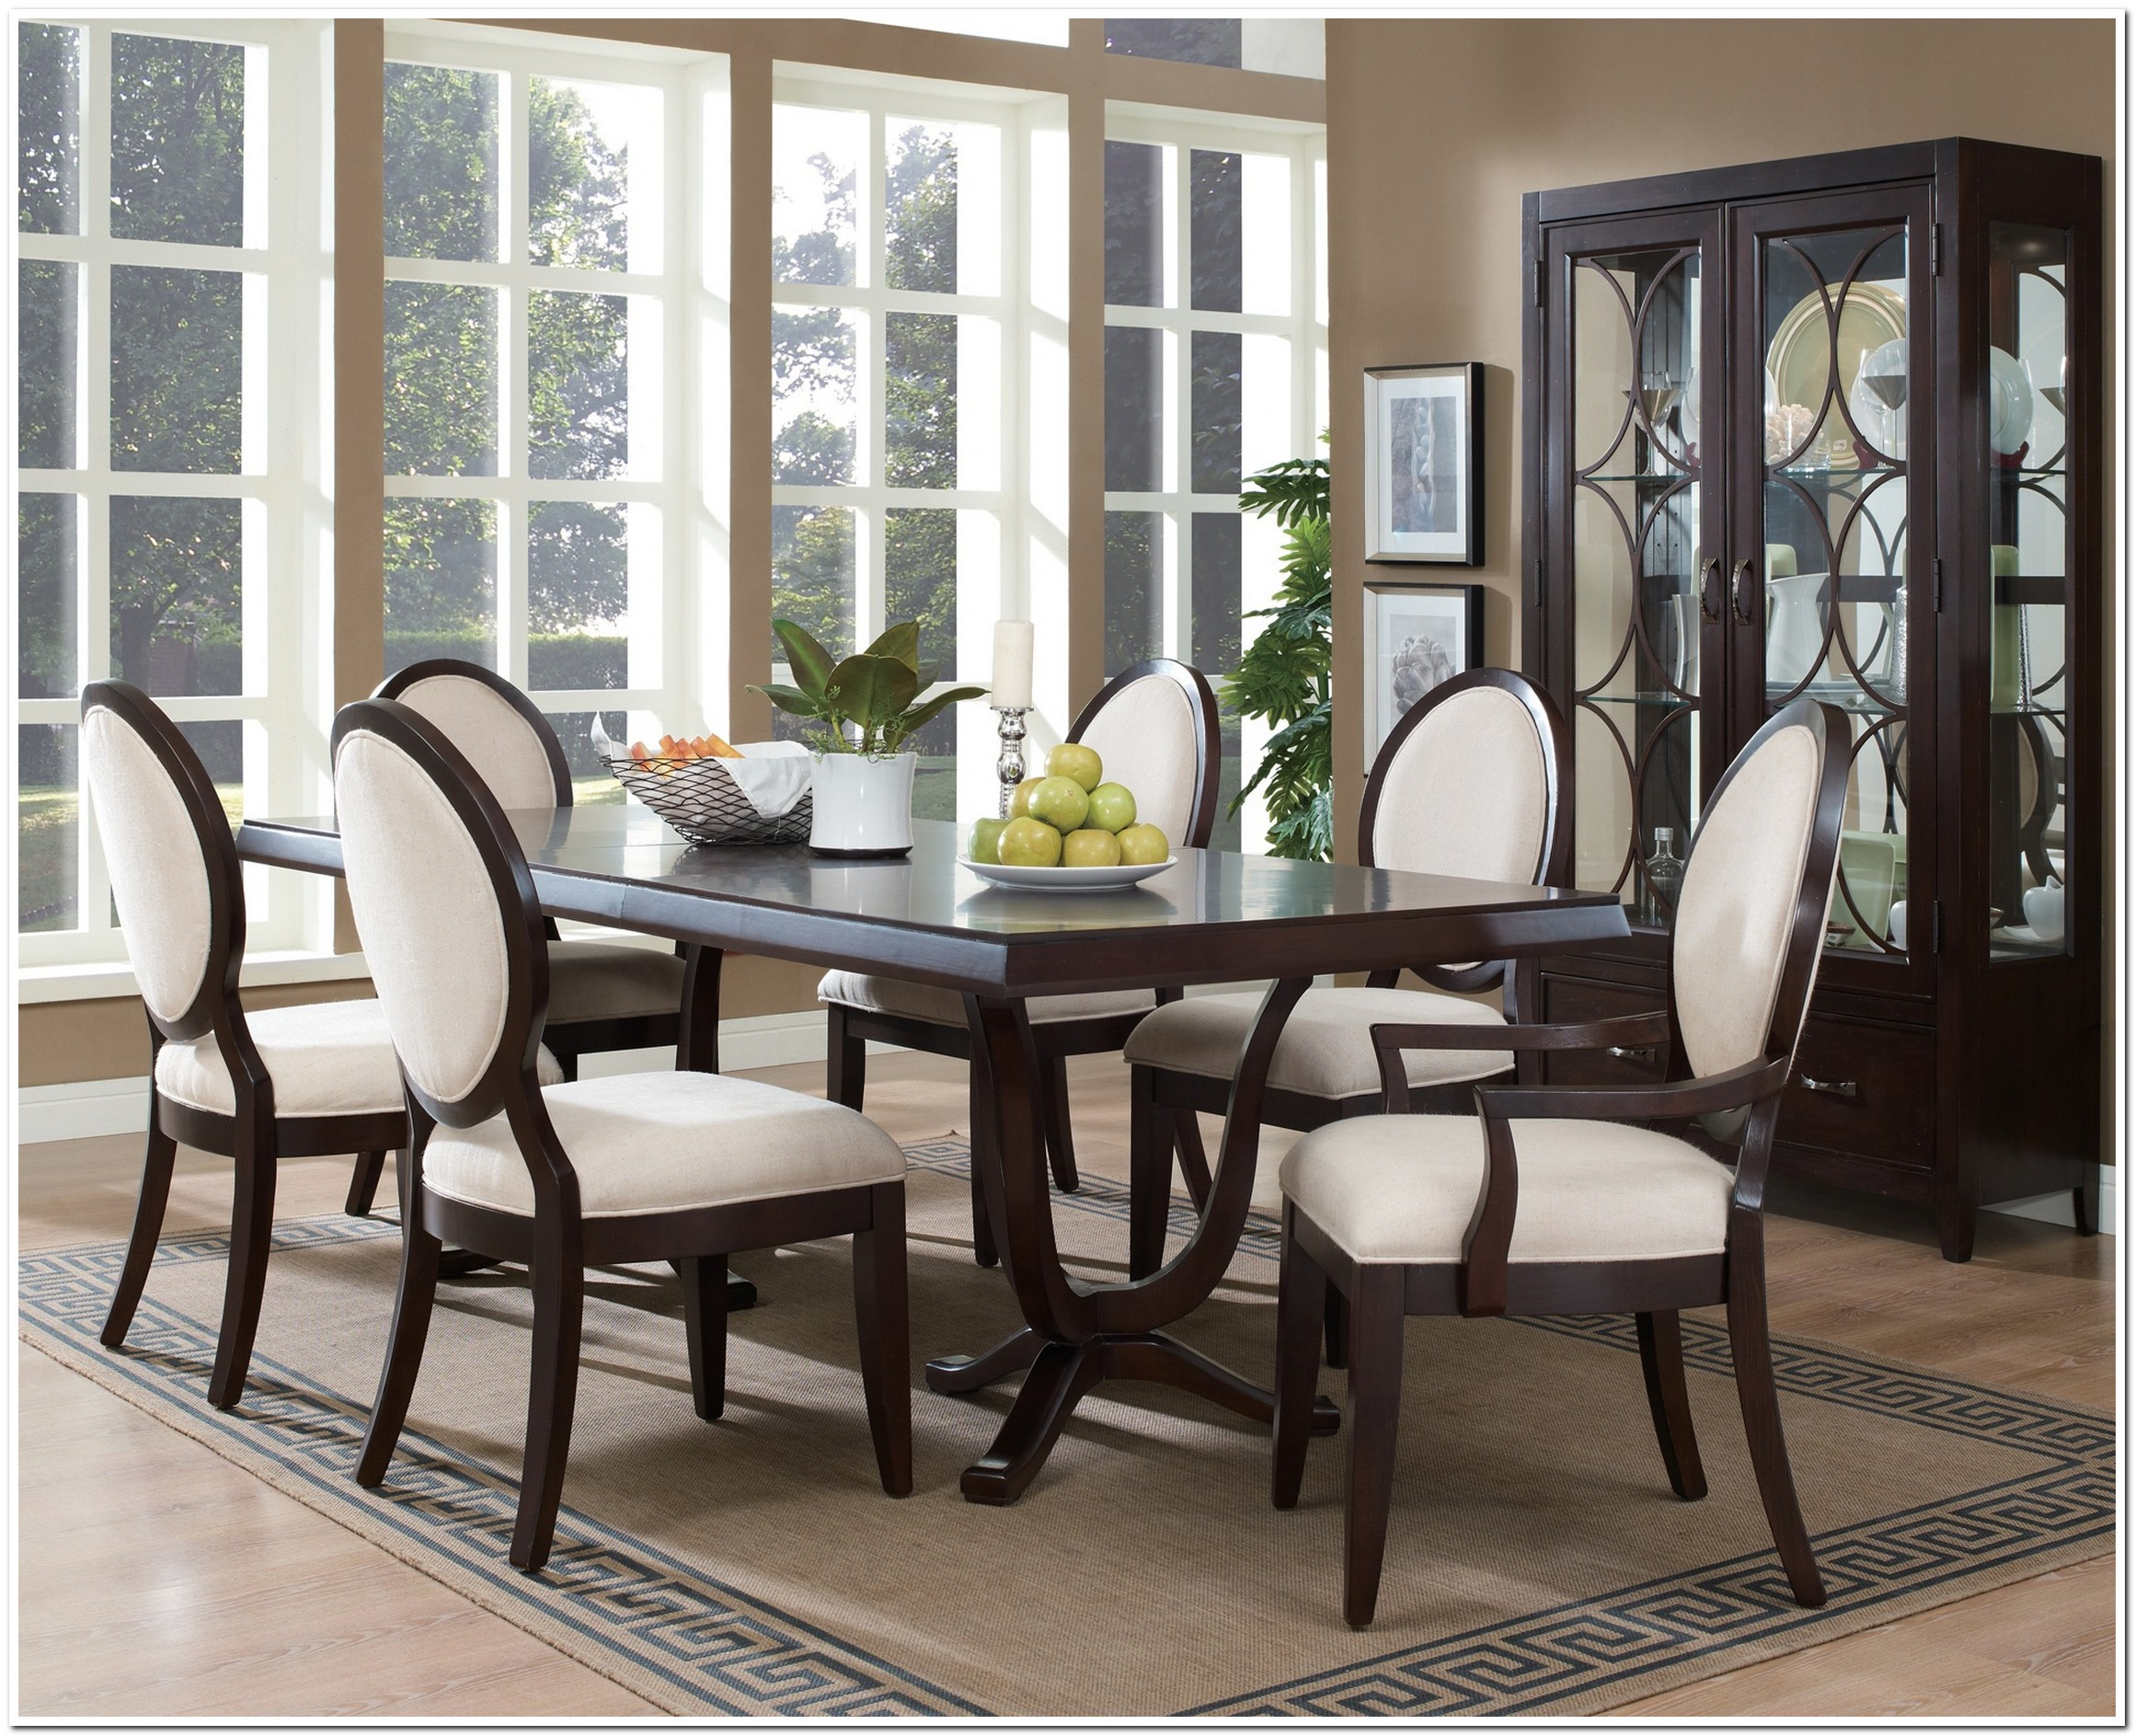 Dining Room Sets For Small Spaces